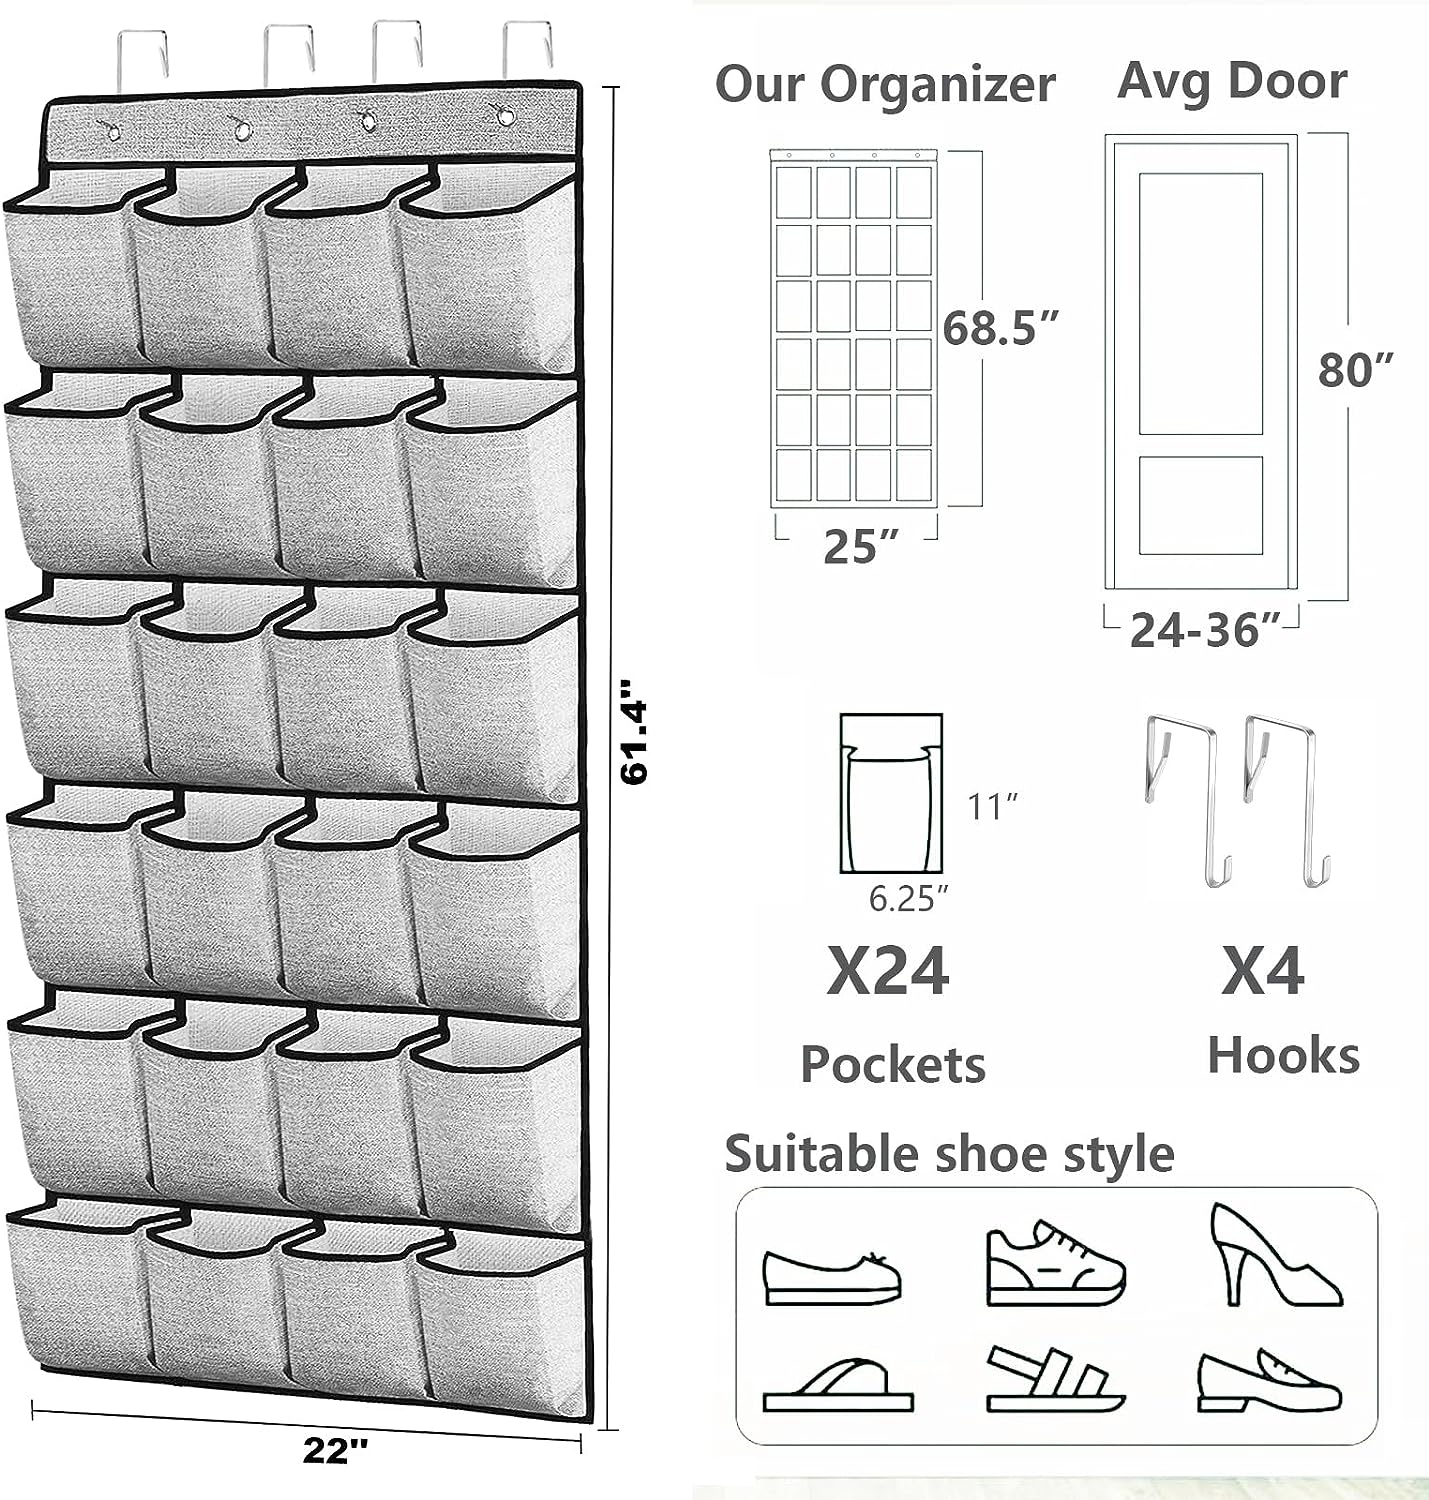 Blushbees® 2-Pack Over-the-Door Shoe Organizer 